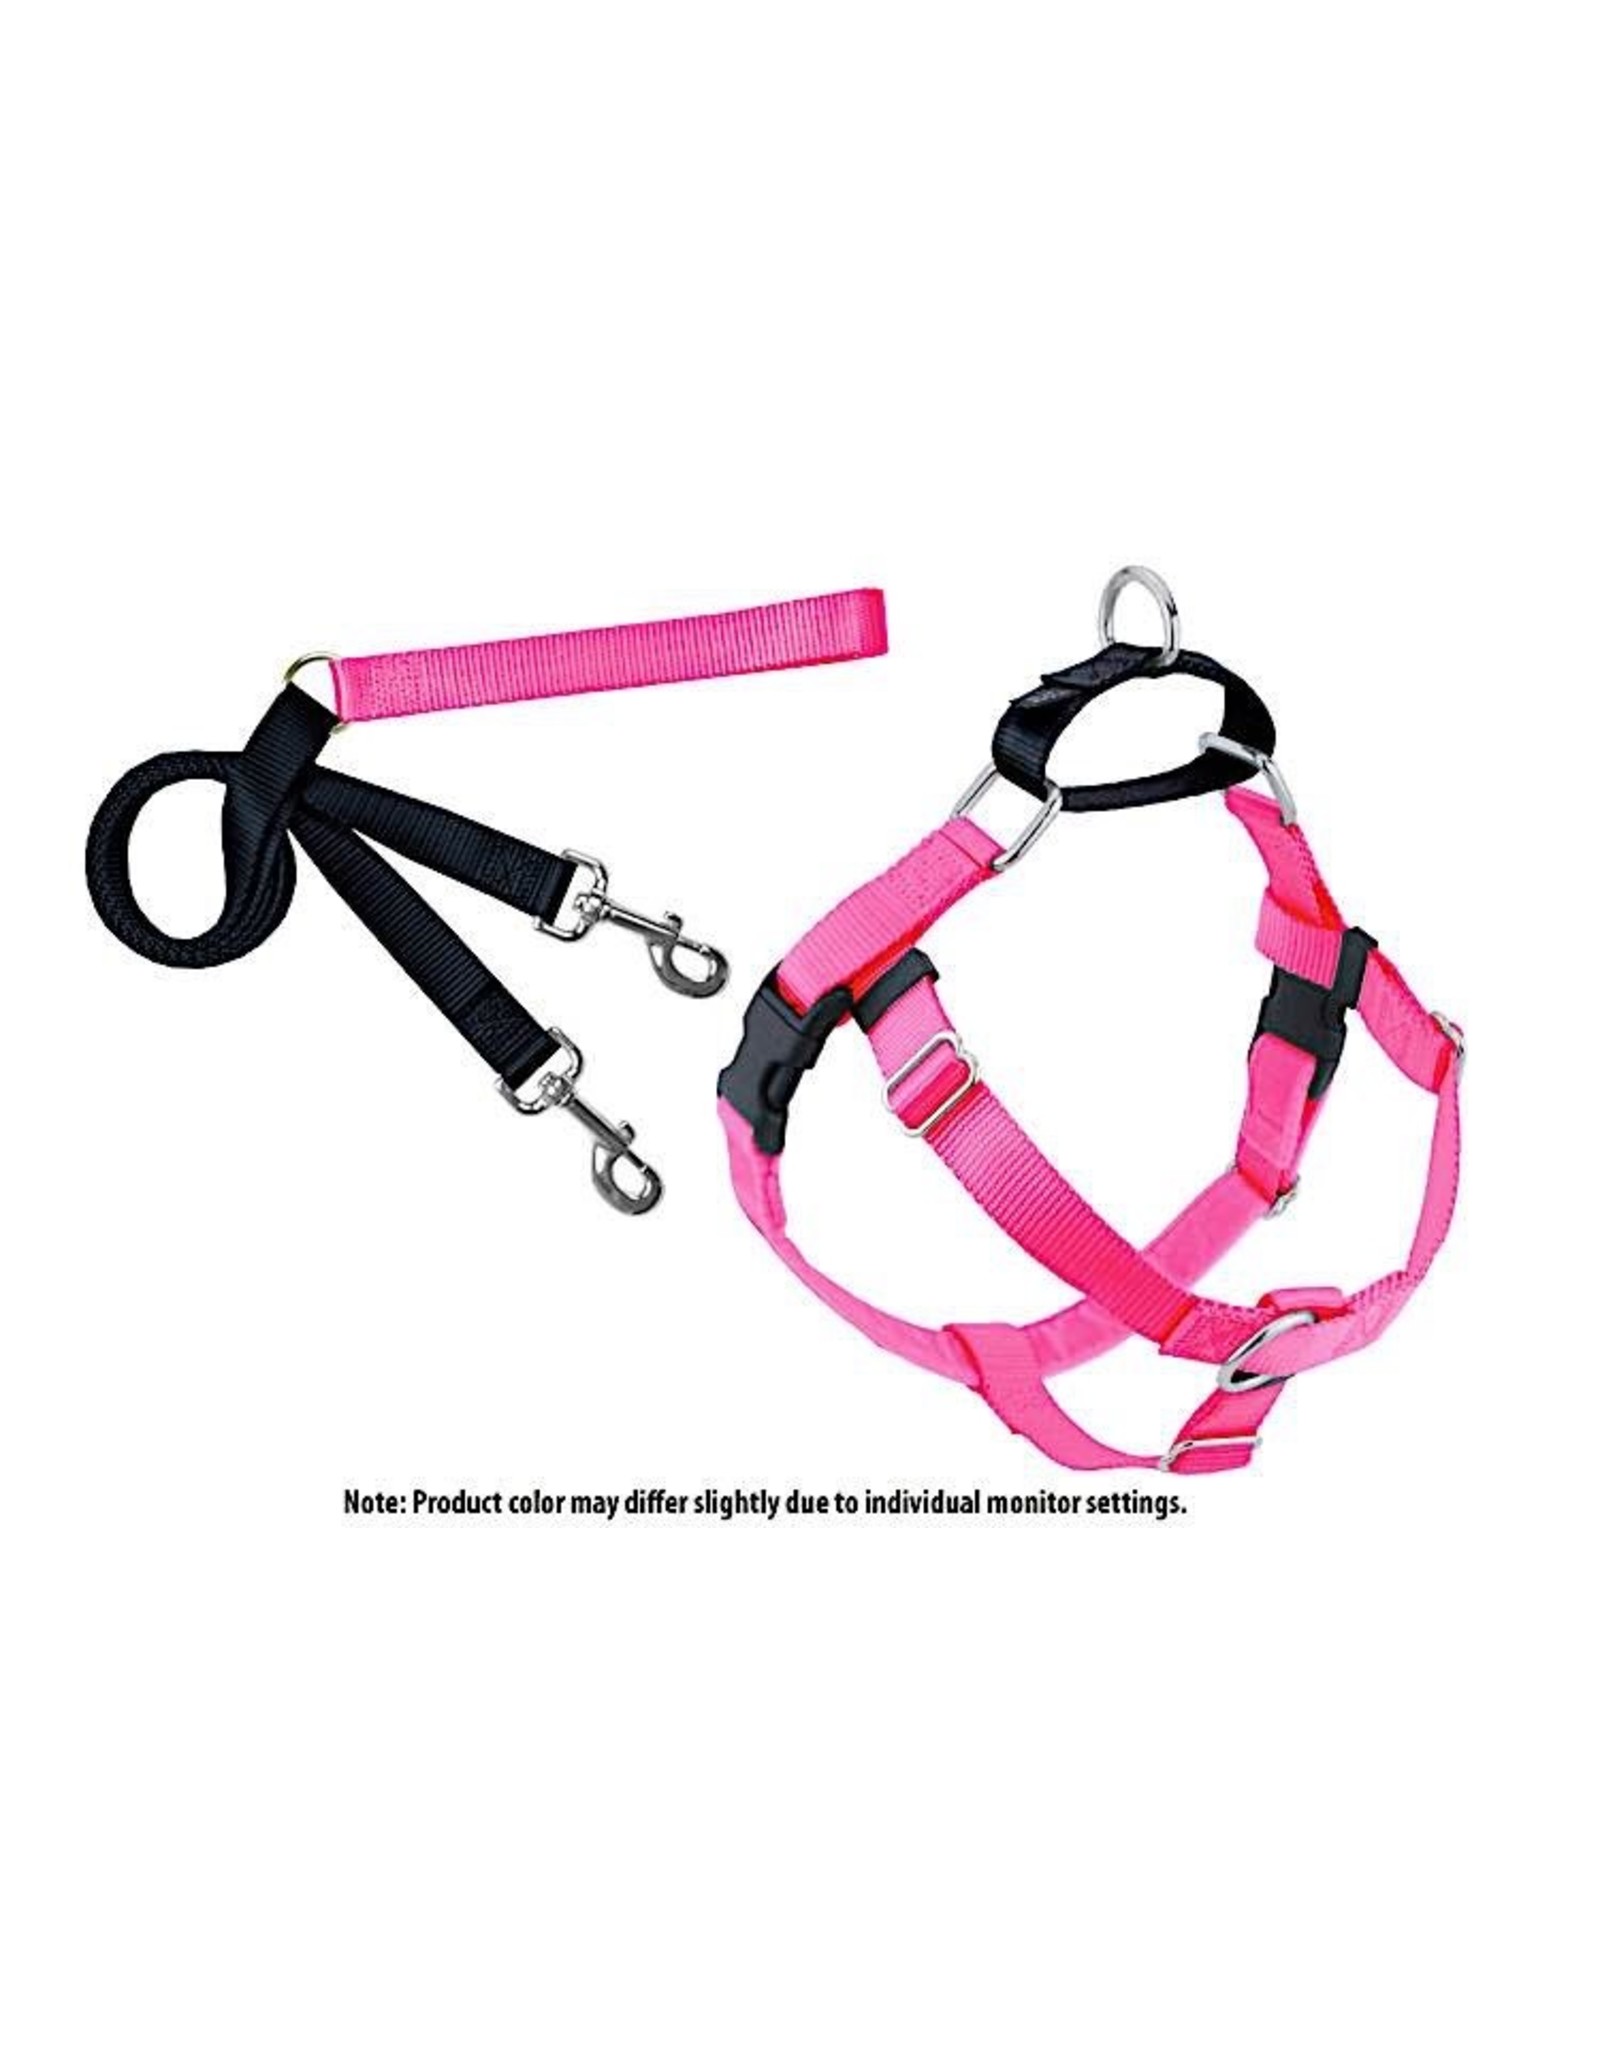 2 Hounds Design Freedom No-Pull Harness: Hot Pink